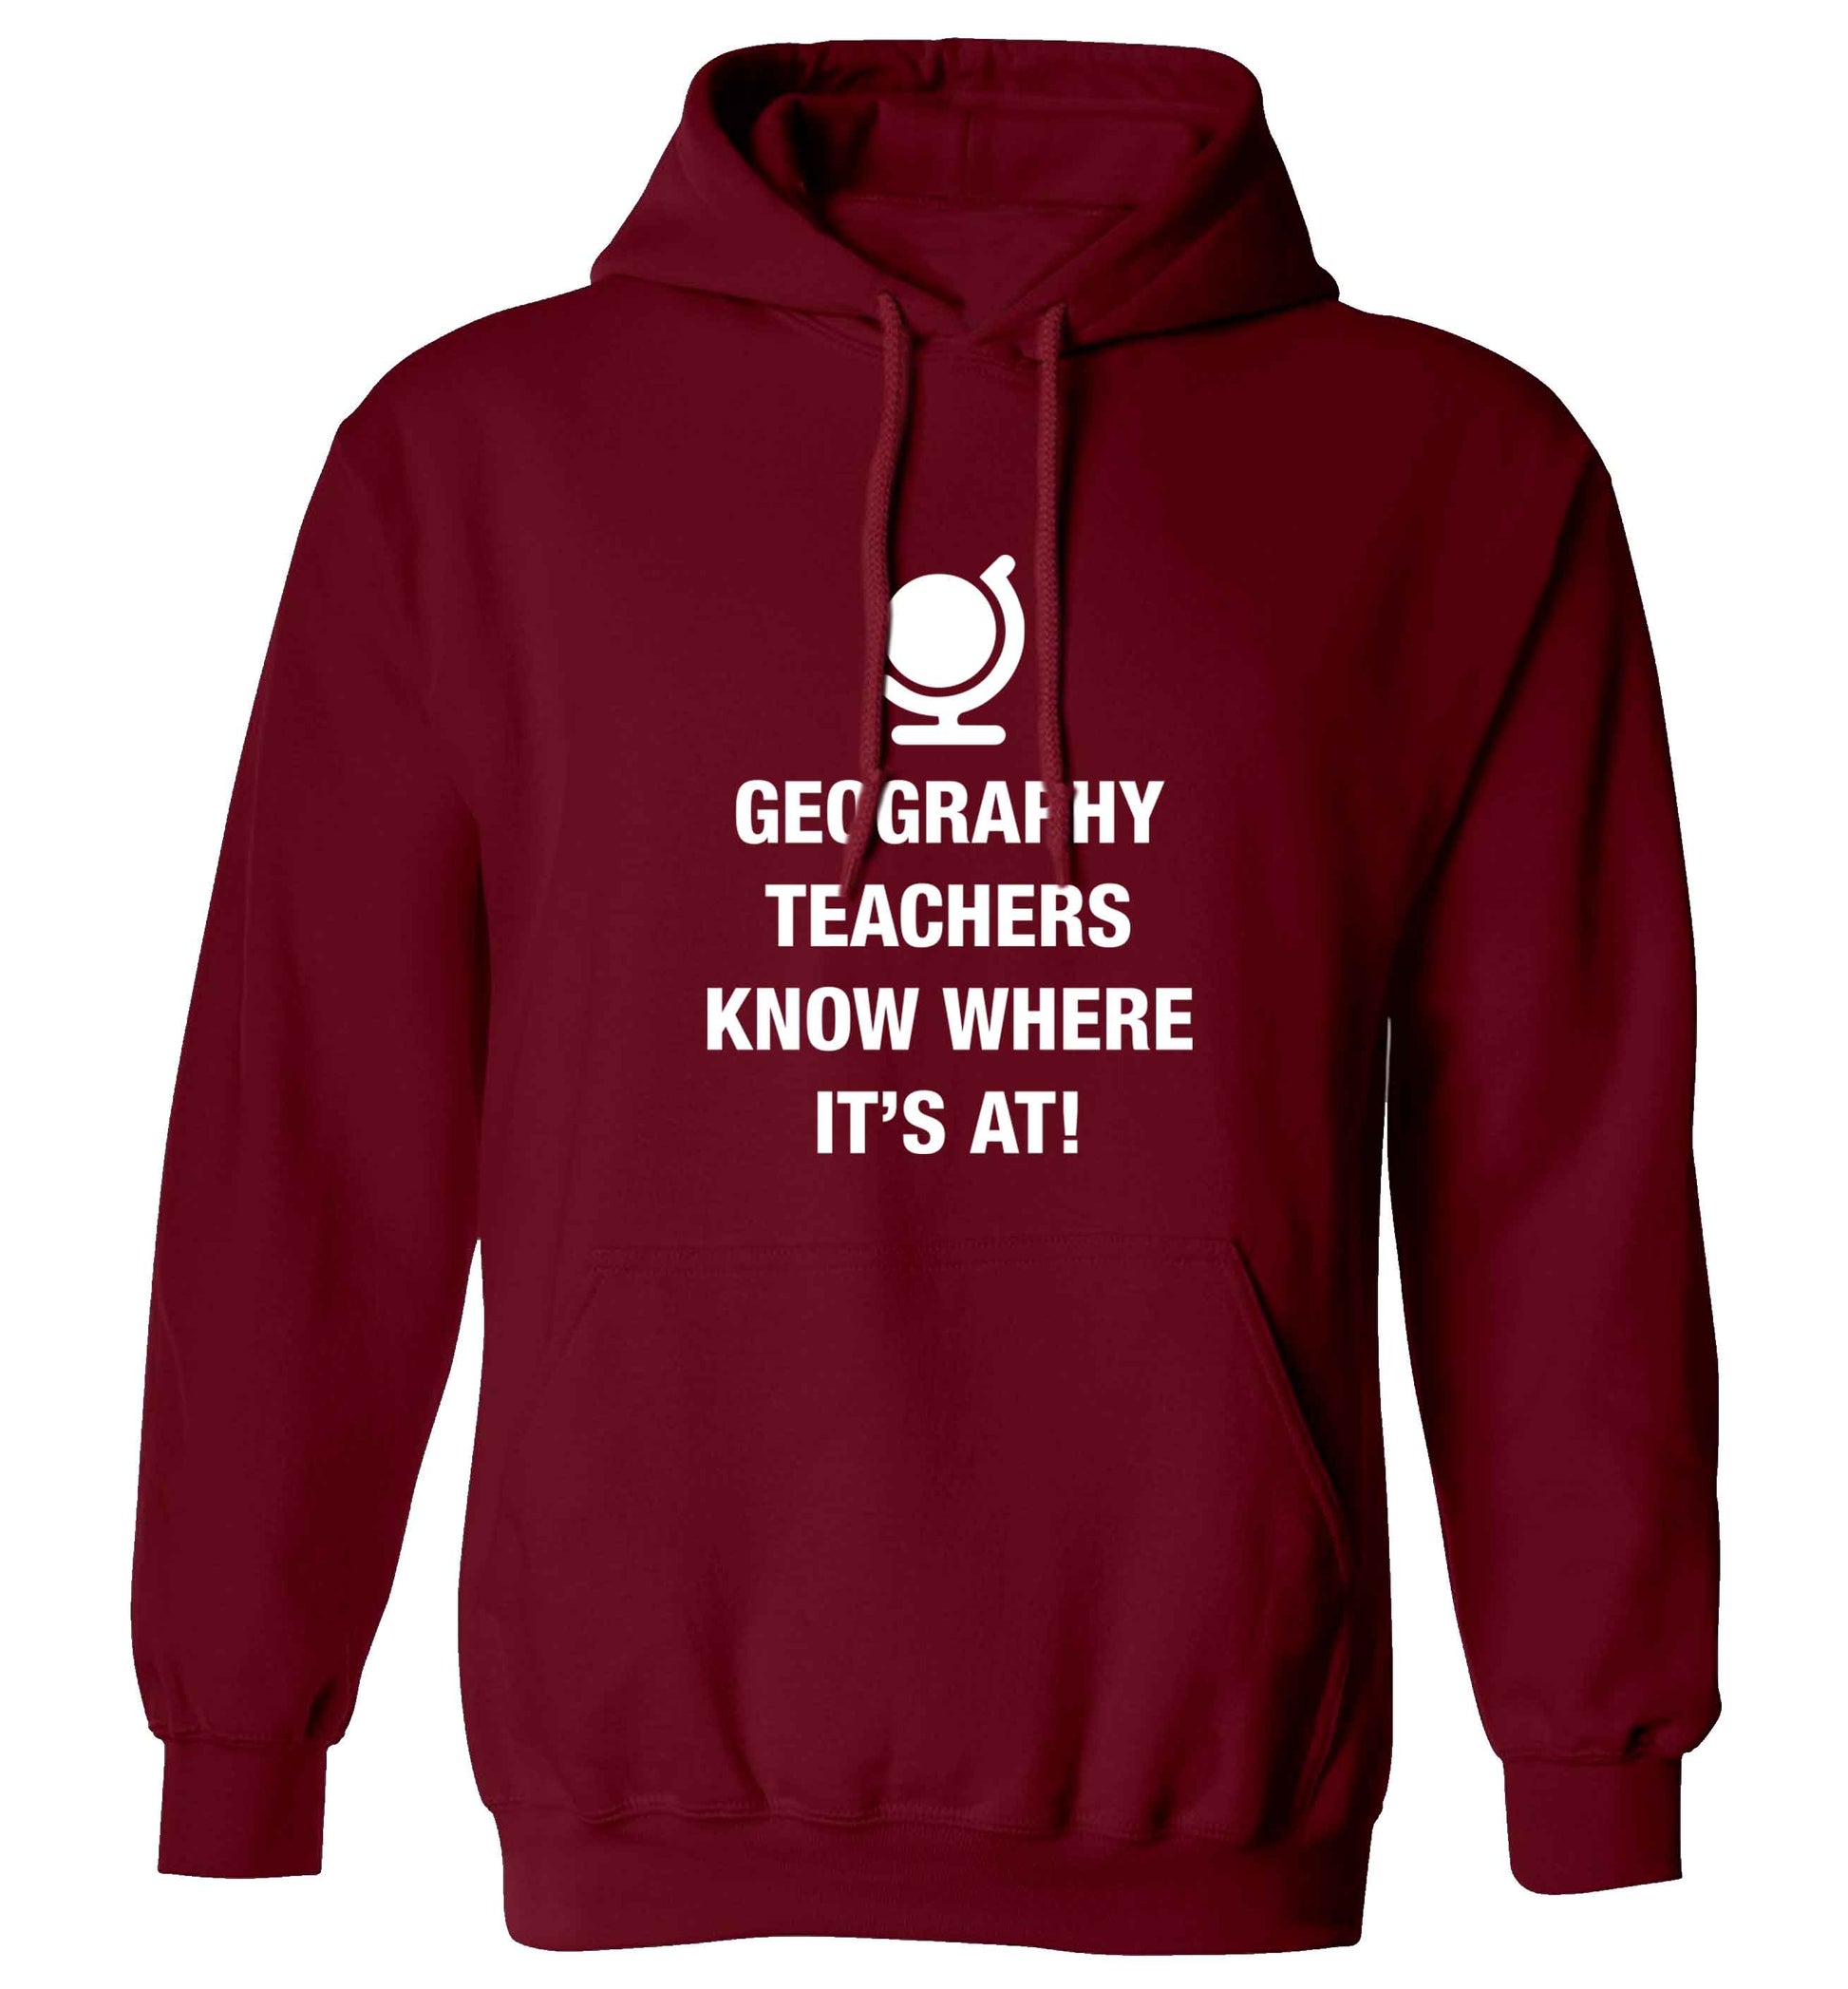 Geography teachers know where it's at adults unisex maroon hoodie 2XL